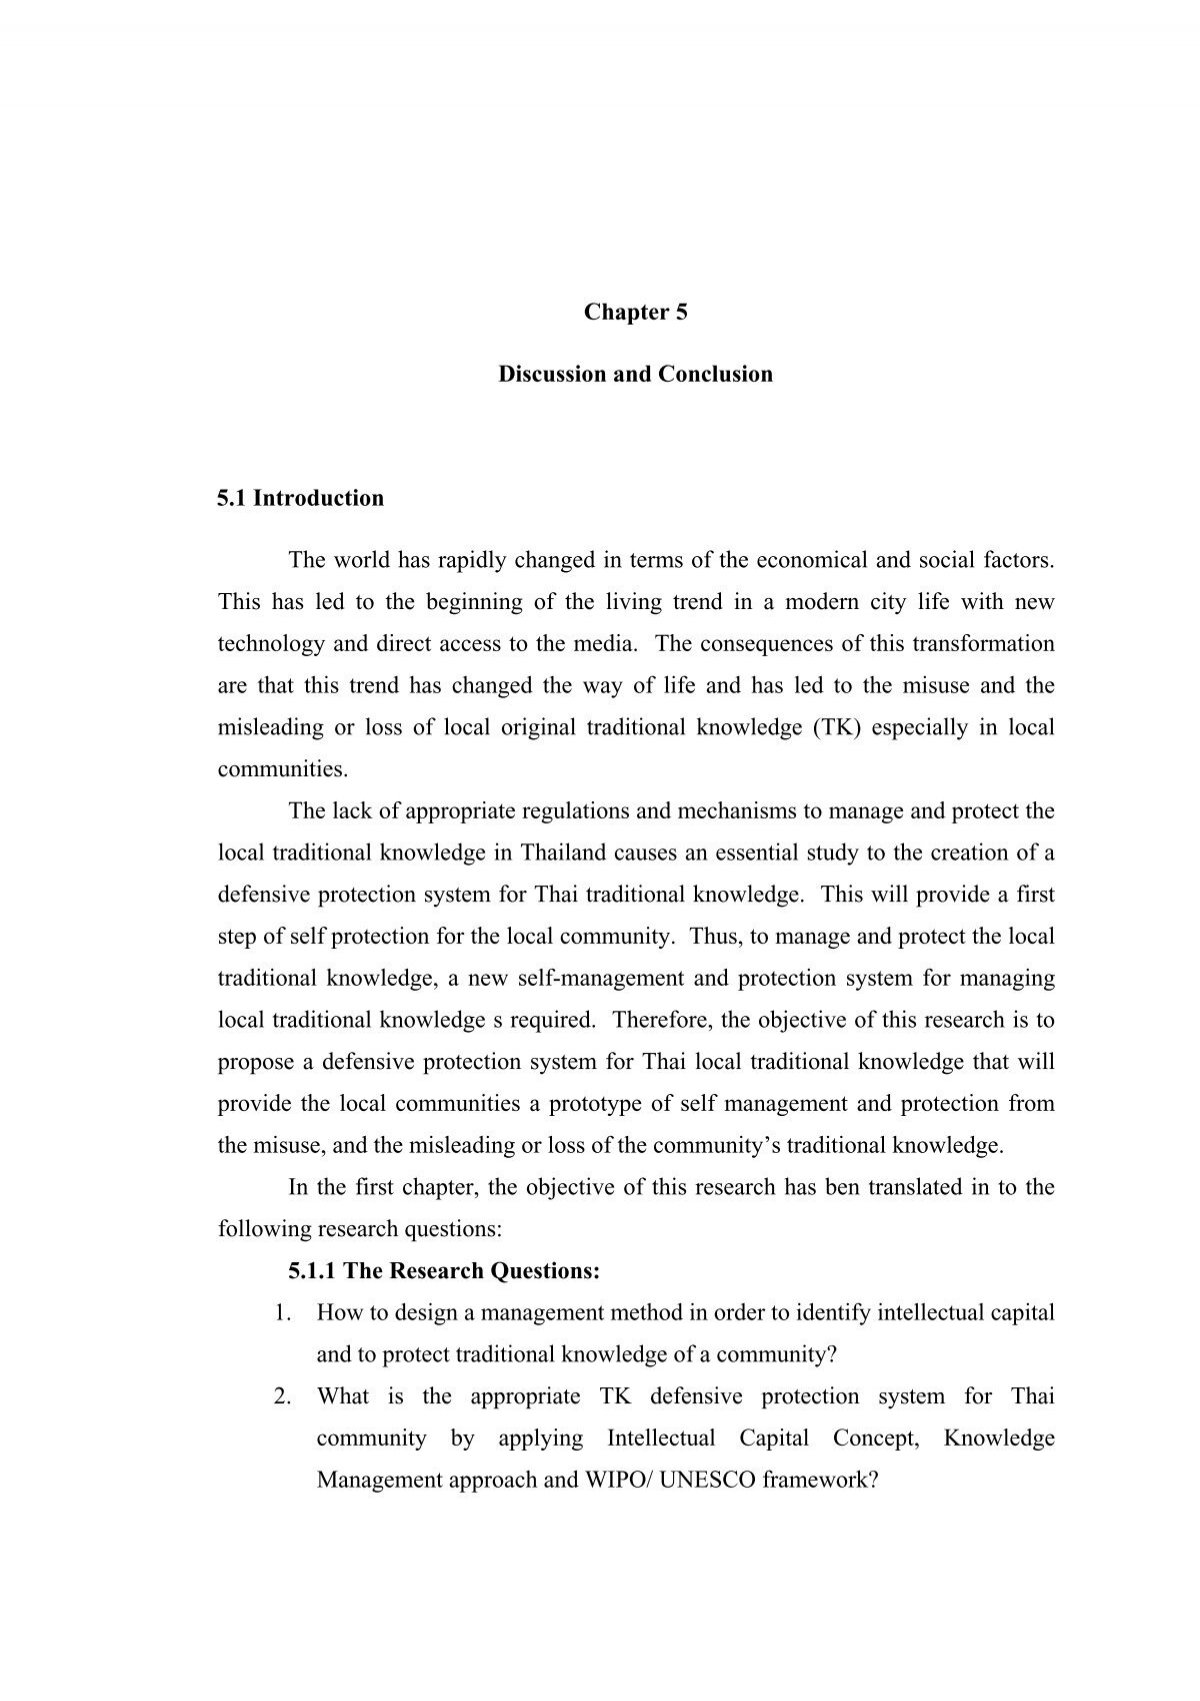 in research chapter v contains the discussion conclusion and recommendation